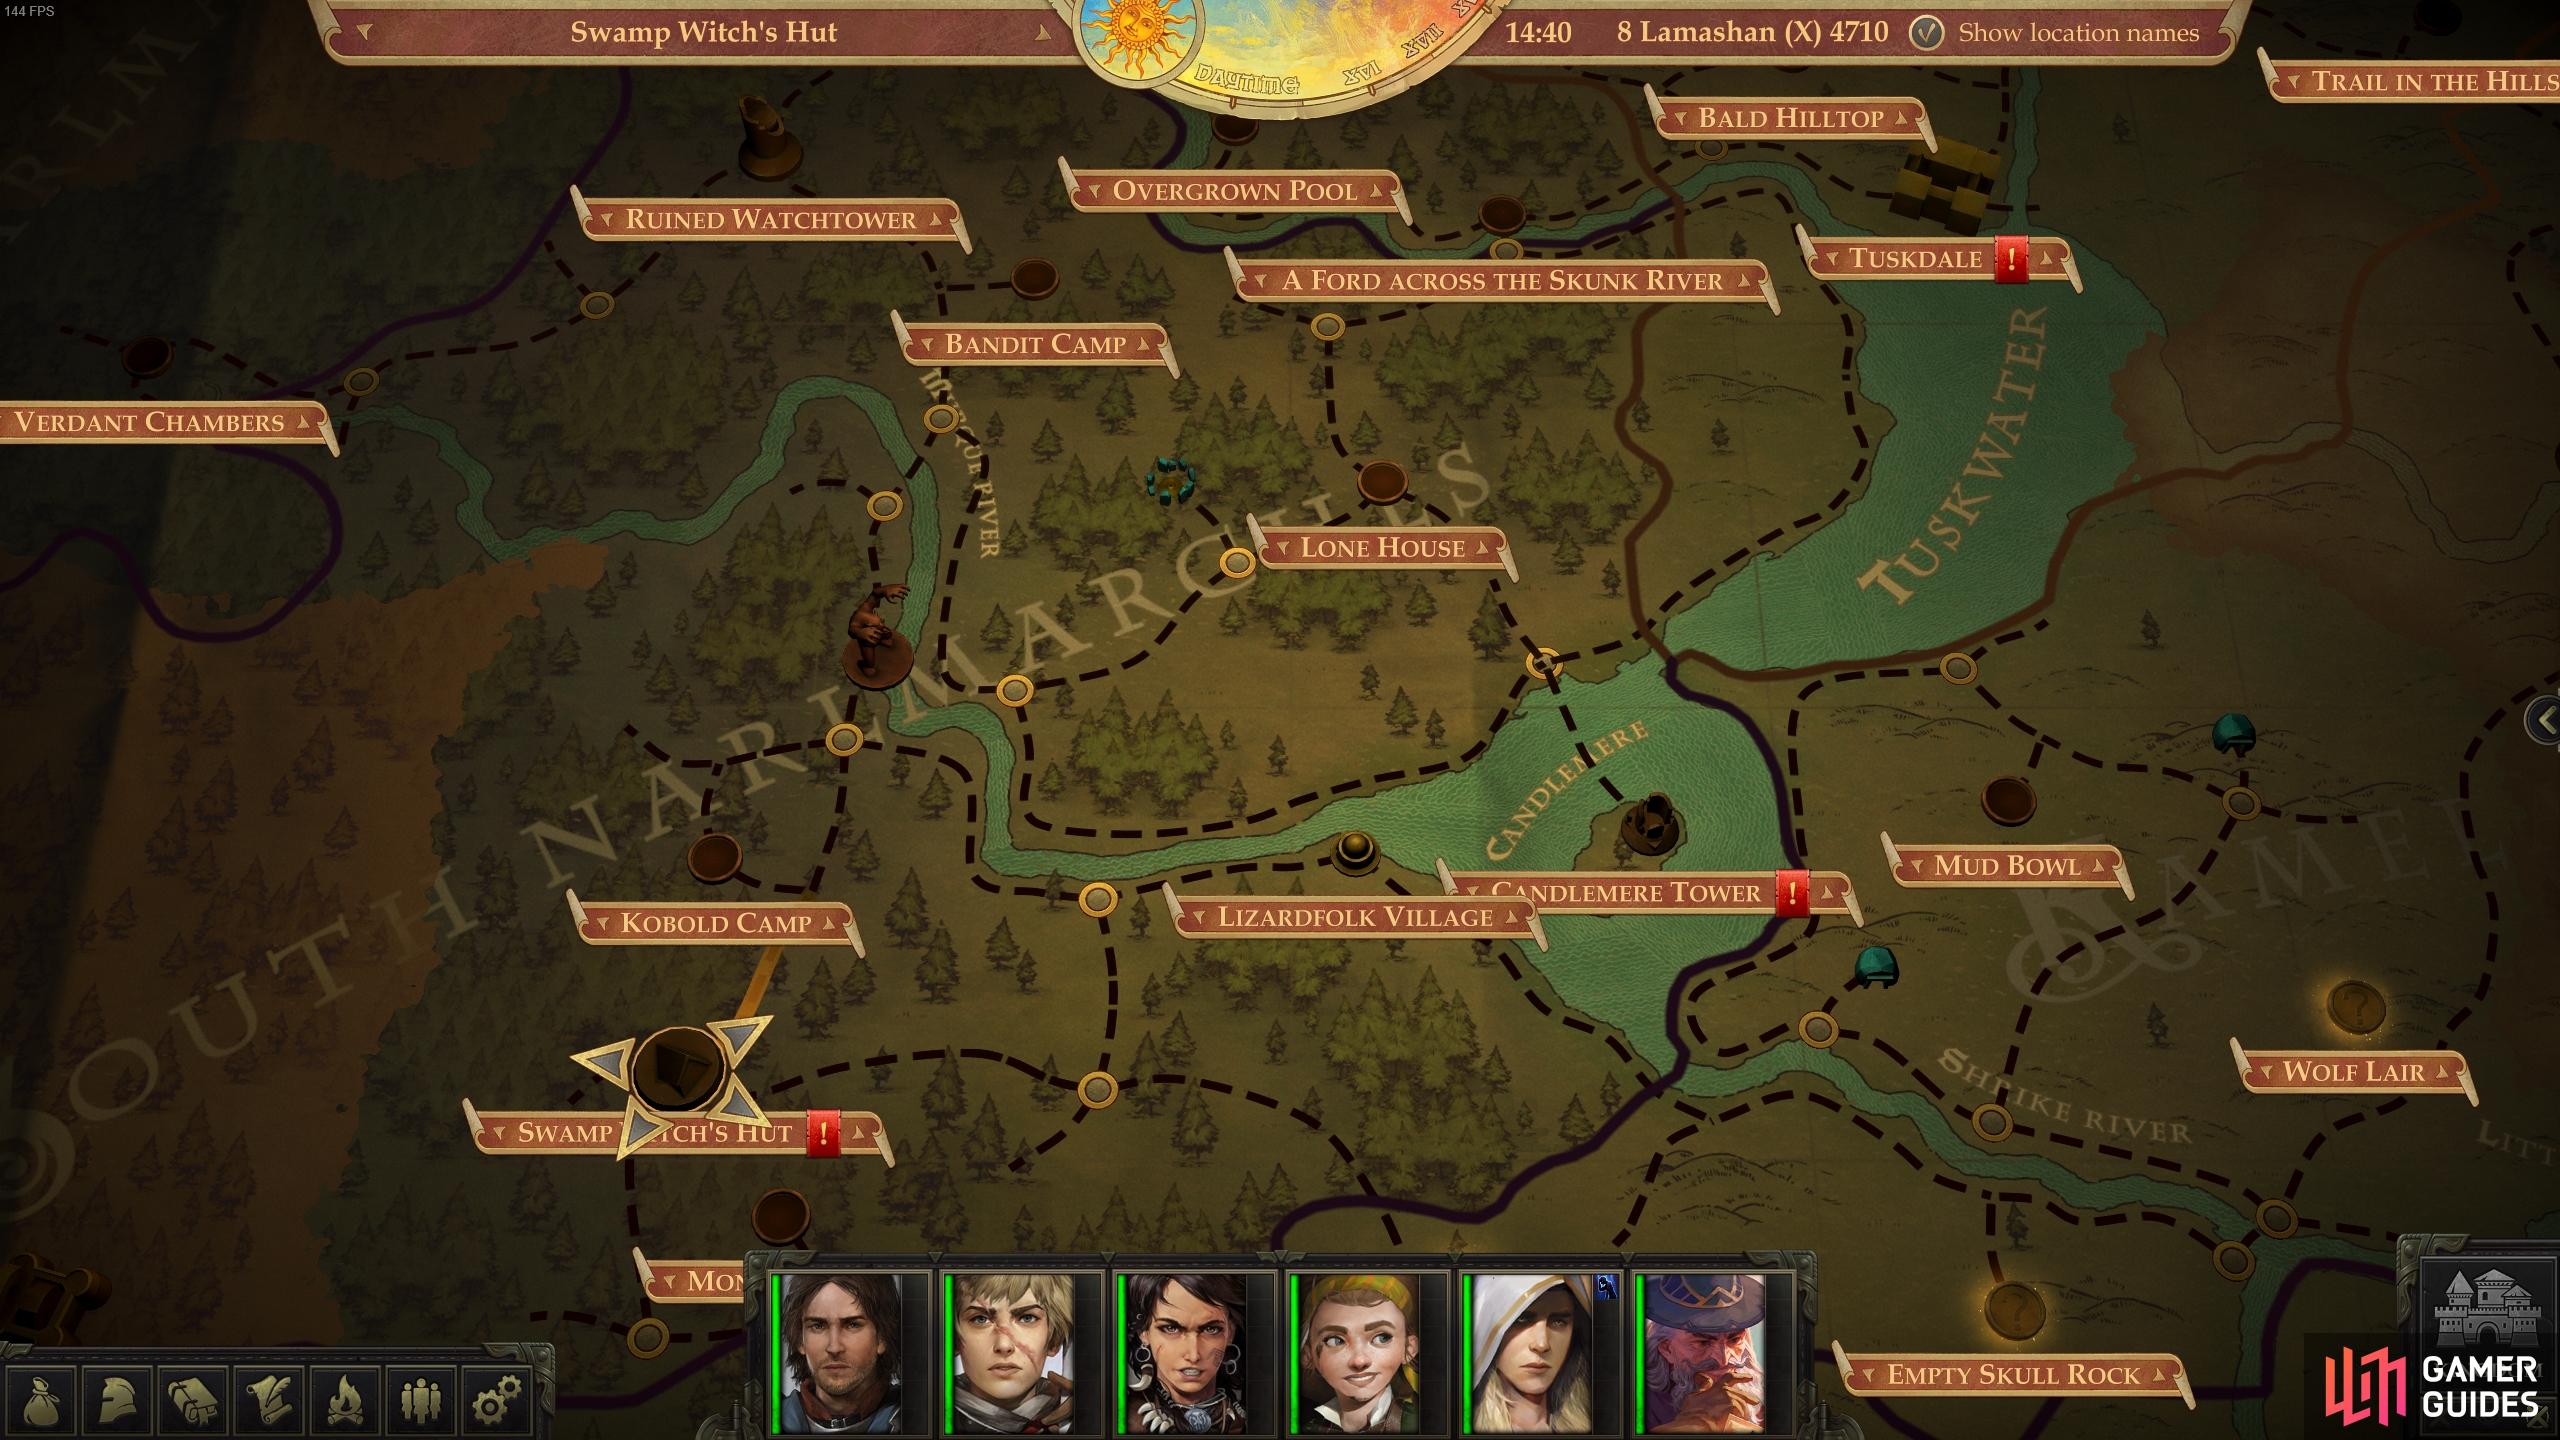 The location of Swamp Witch’s Hut (bottom left) in relation to your capital (top right).